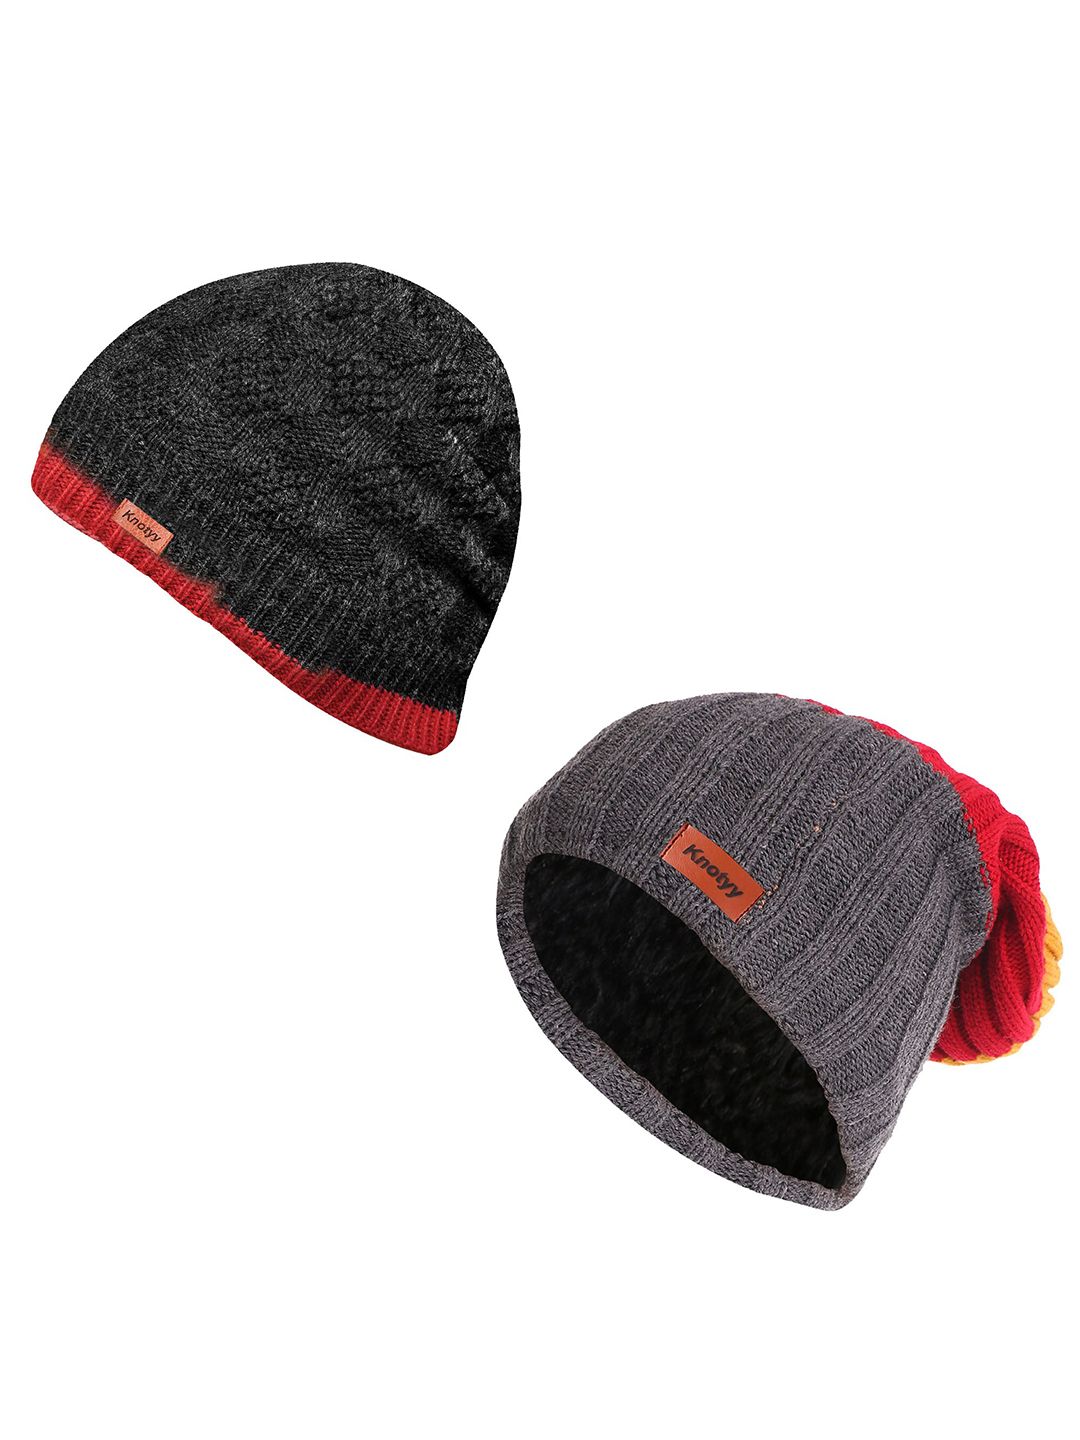 Knotyy Unisex Pack of 2 Grey & Black Acrylic Beanies Price in India